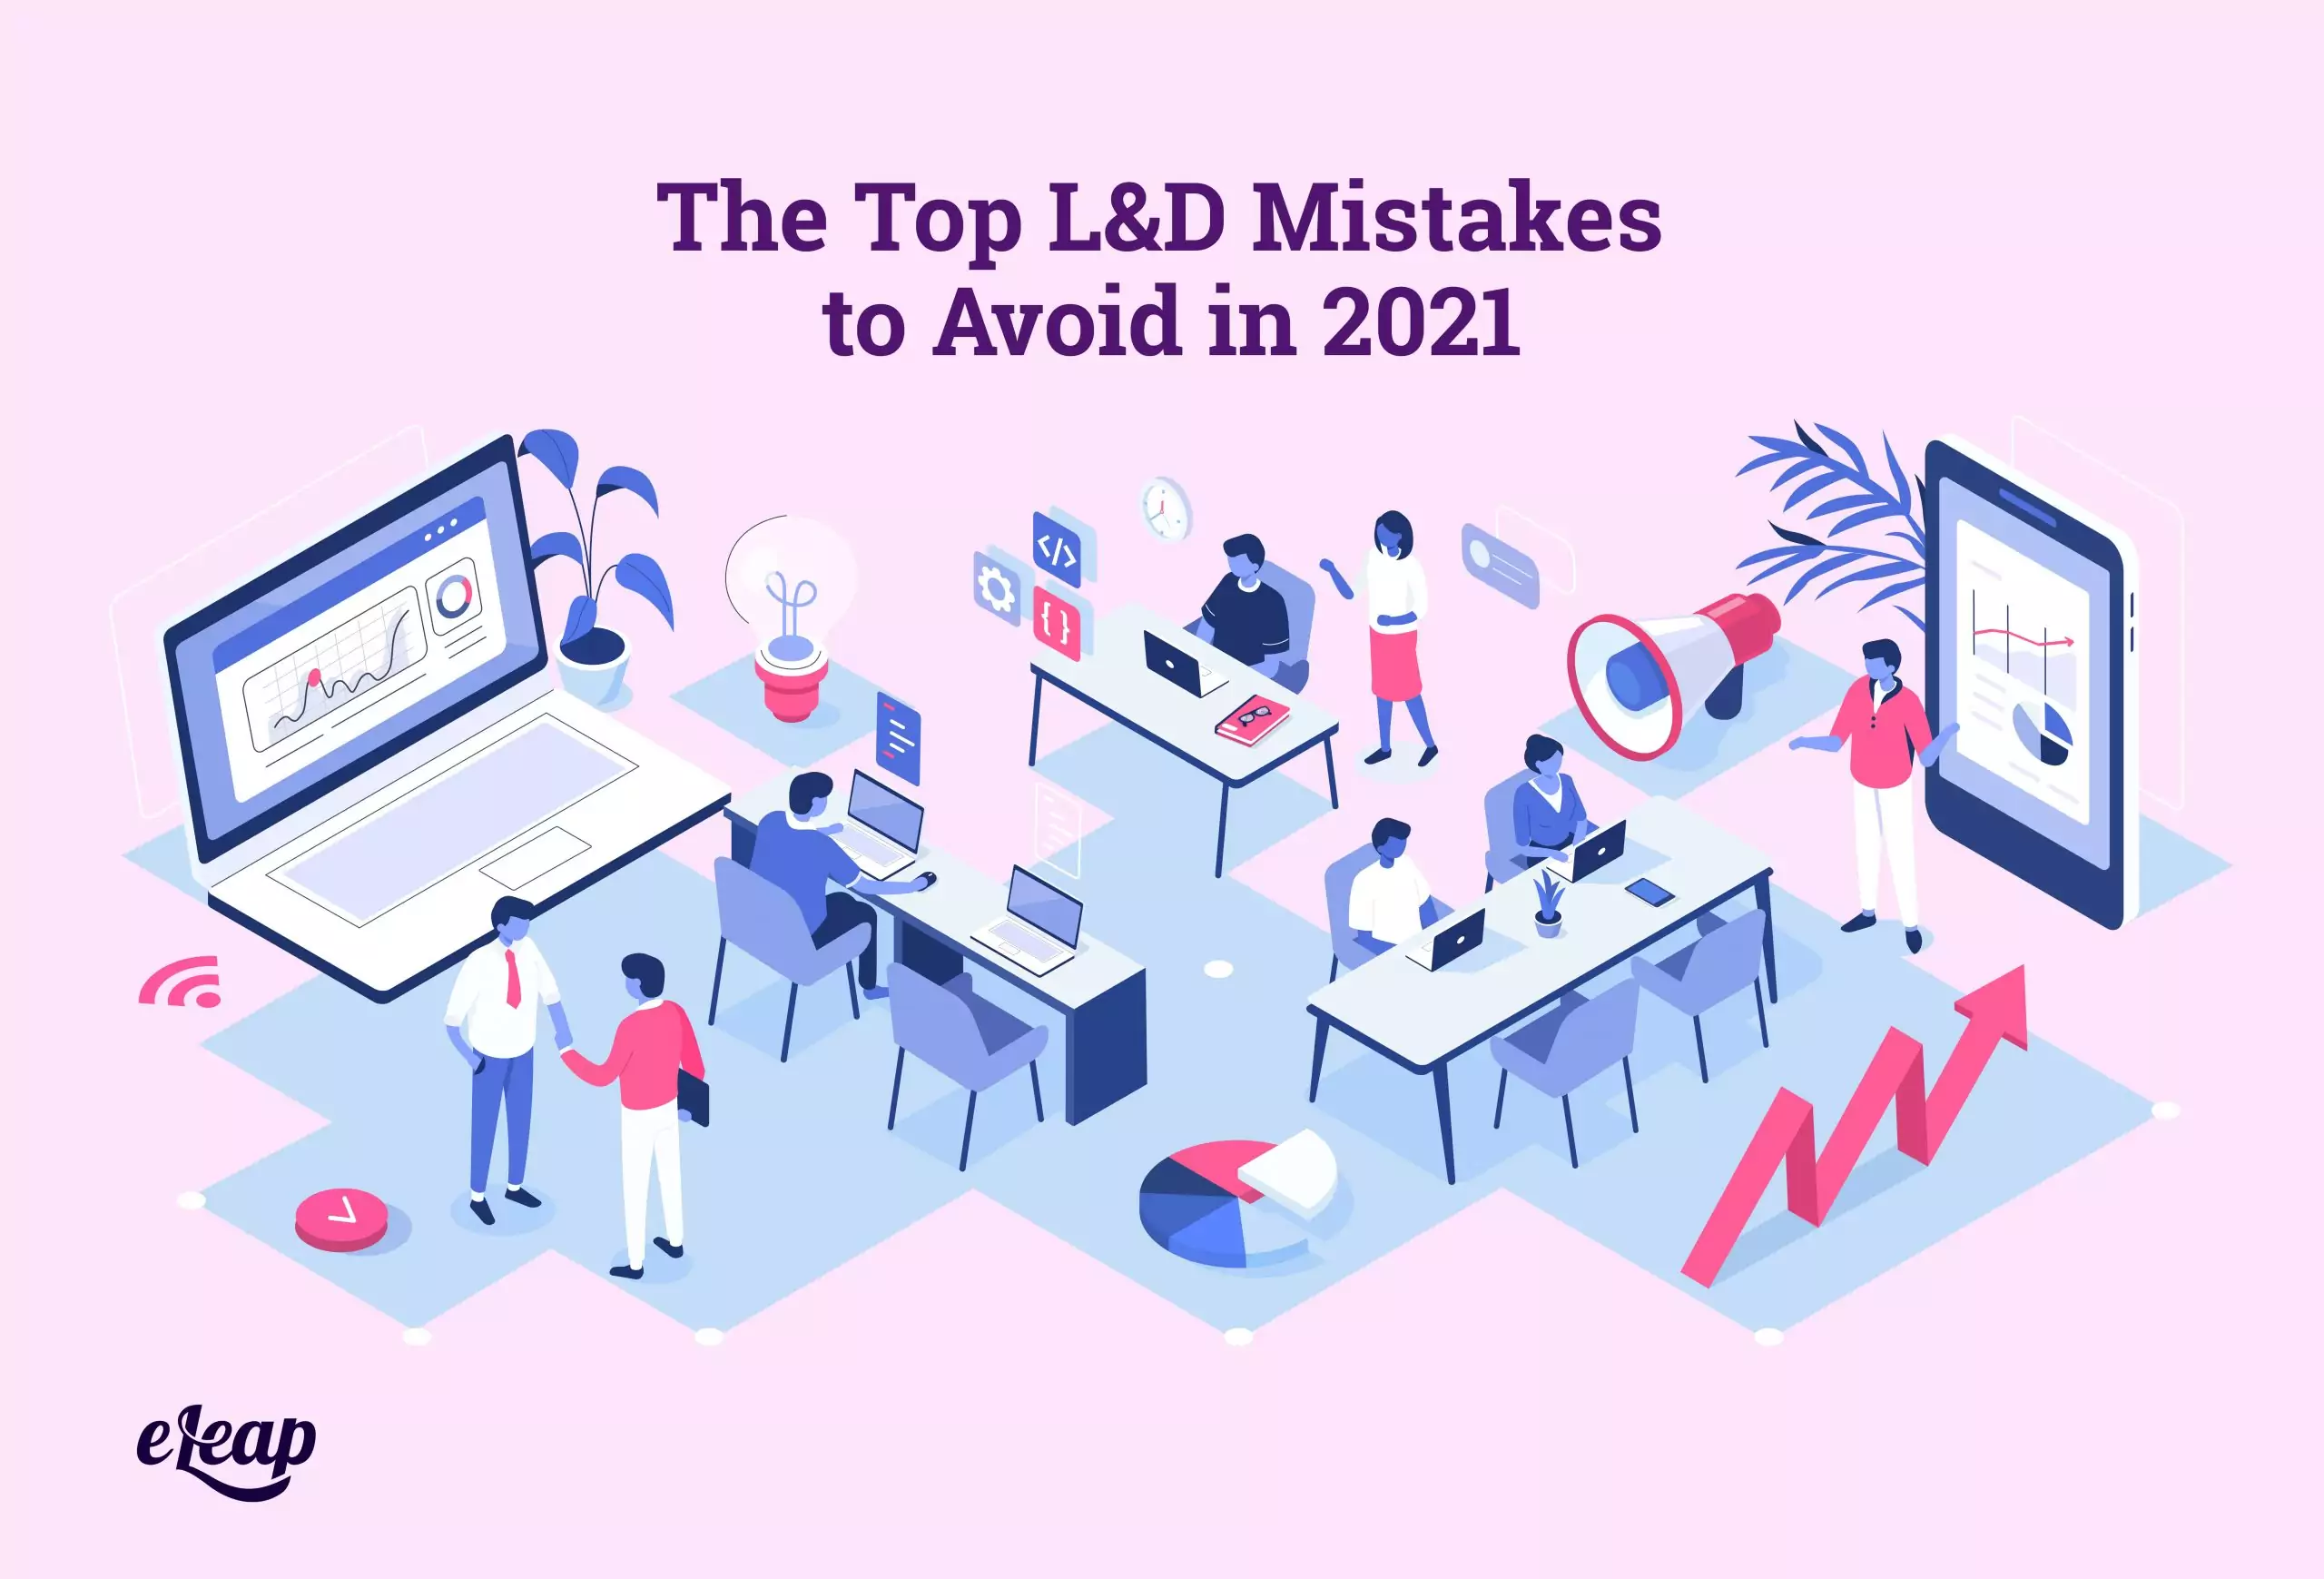 The Top L&D Mistakes to Avoid in 2021